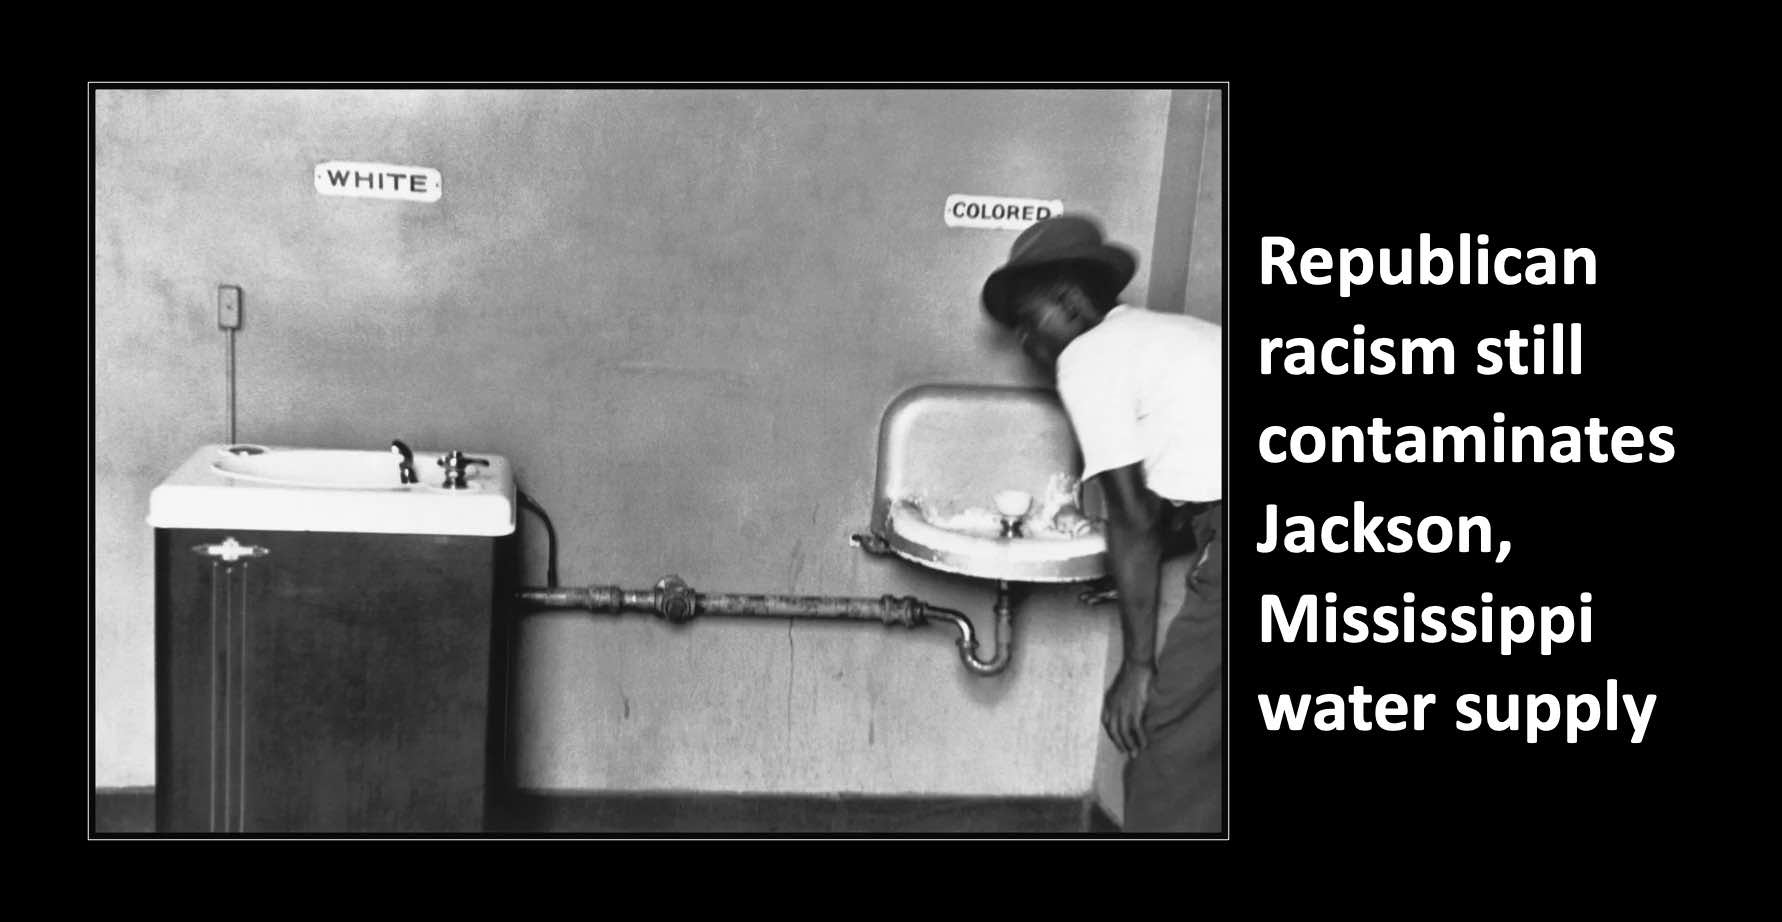 Republican racism still contaminates the water in Jackson Mississippi